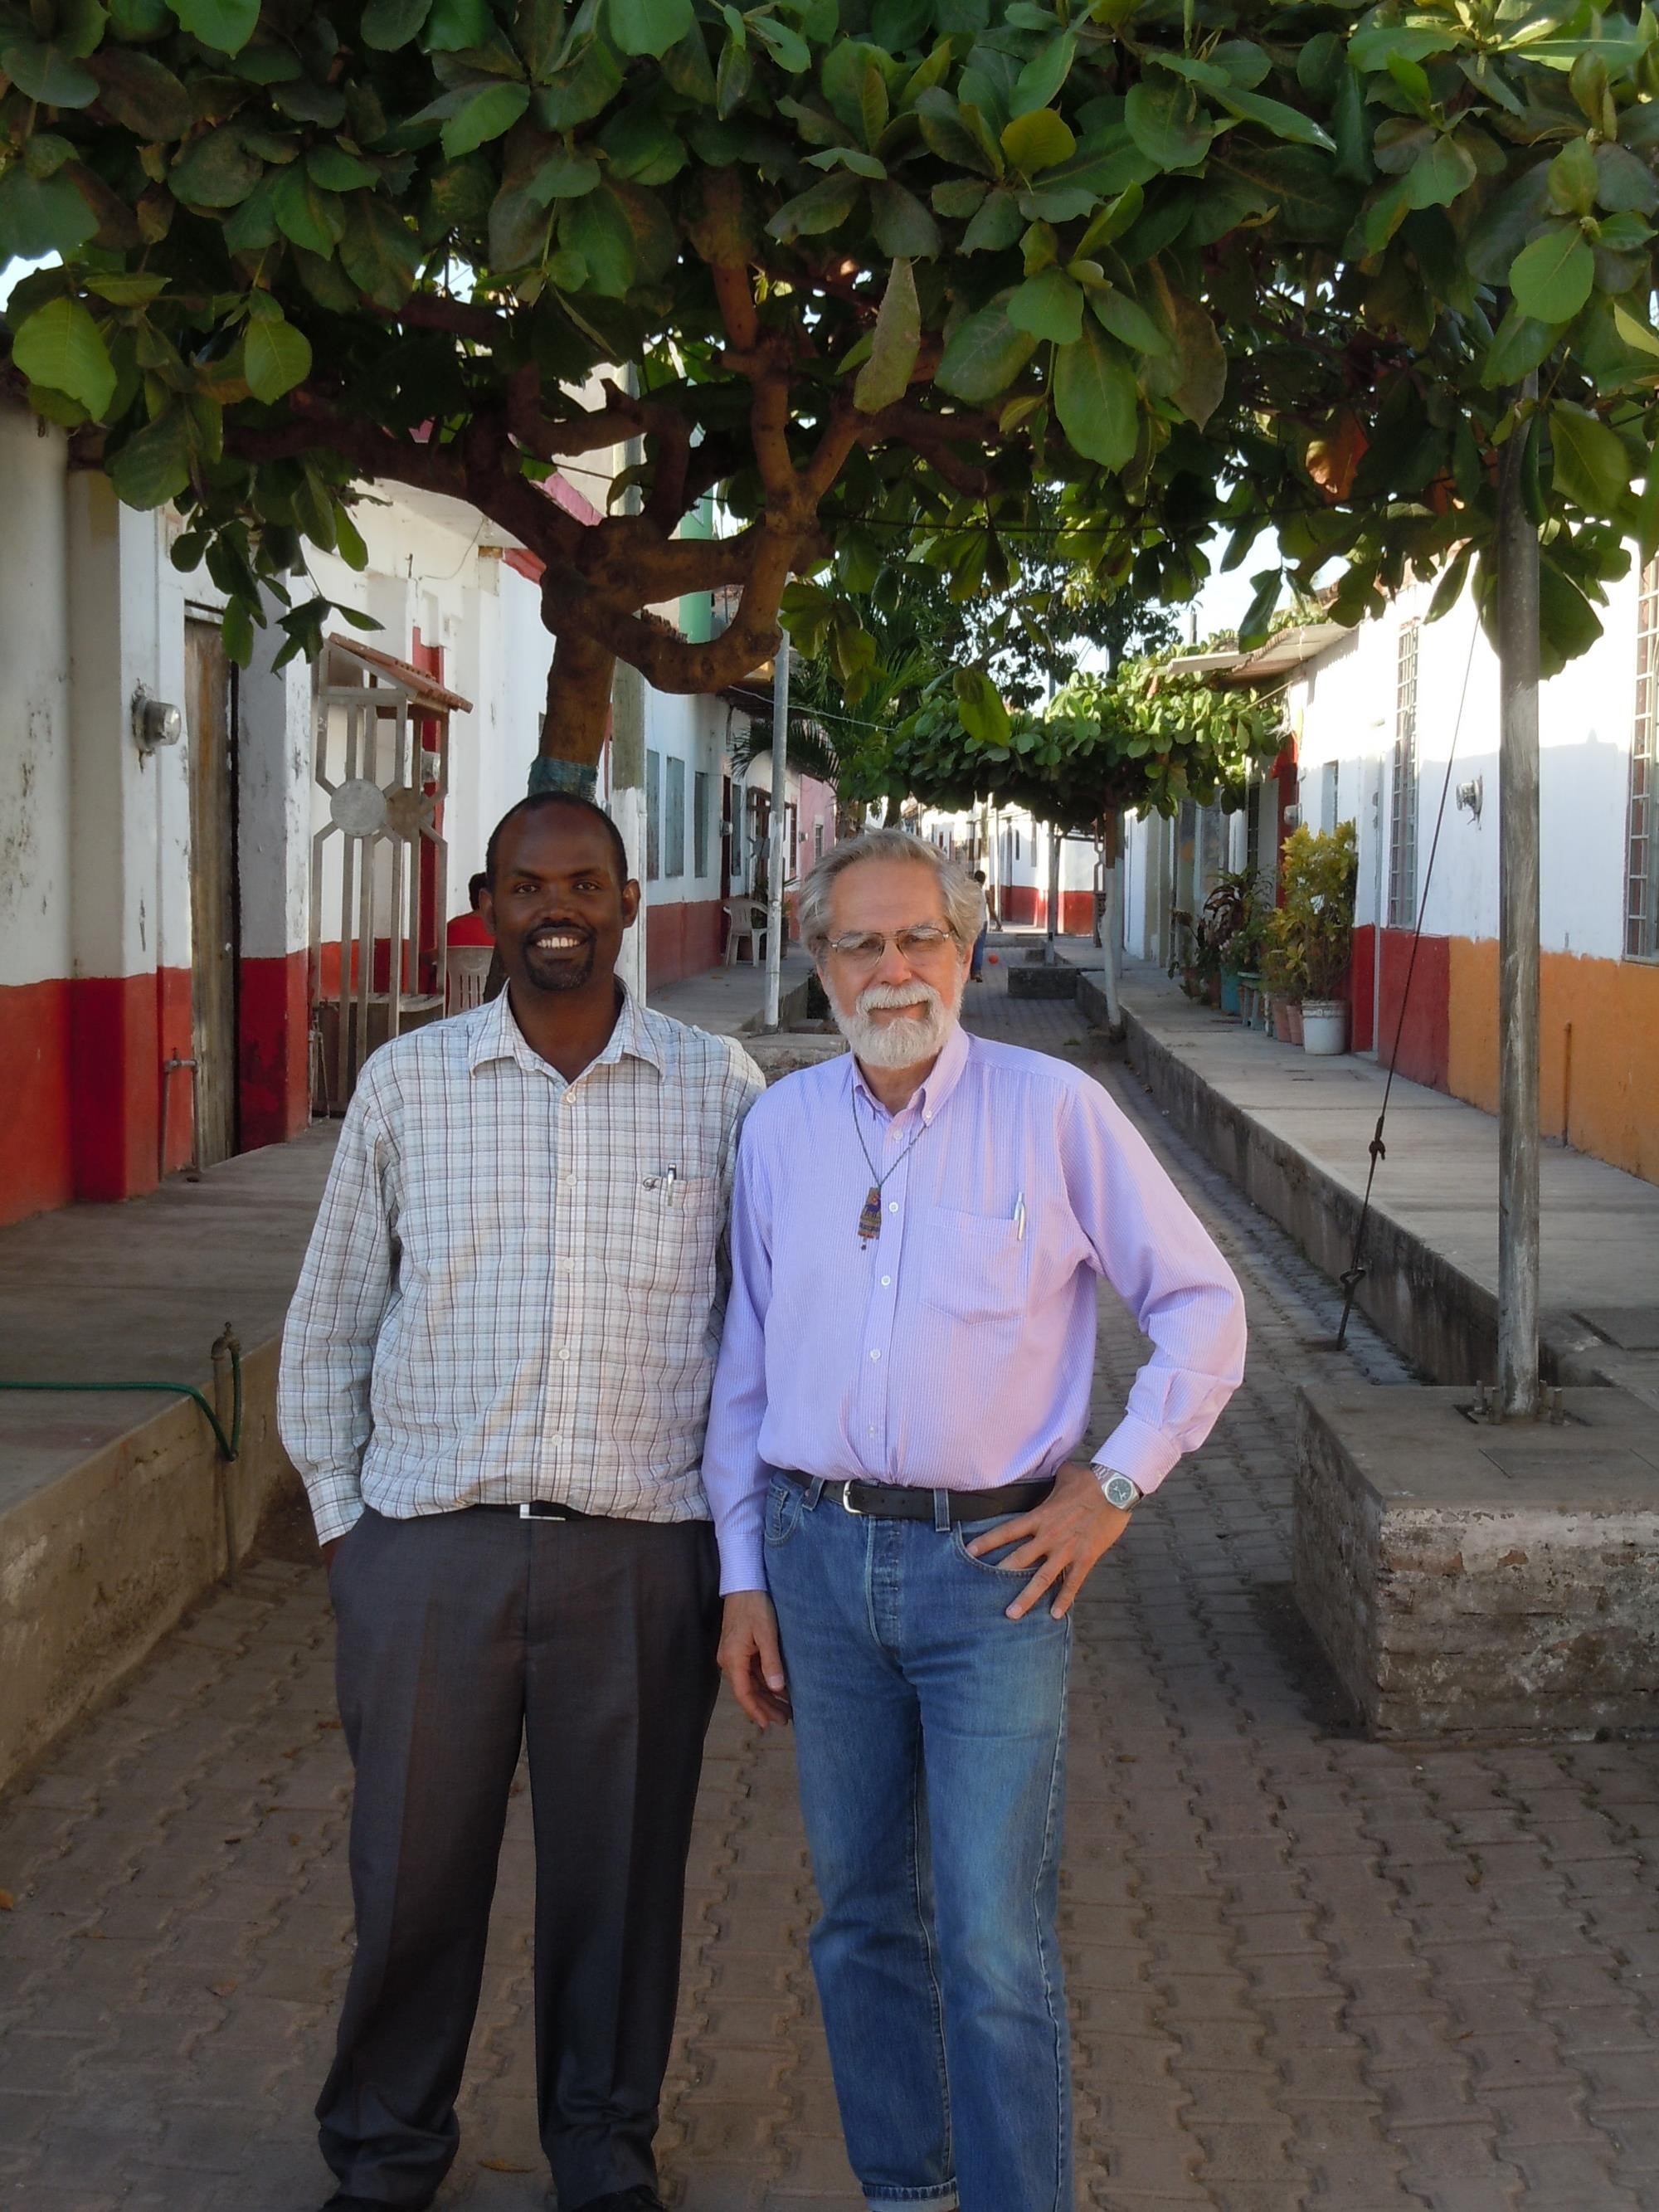 Abdi and Jim in Mexico March 2014